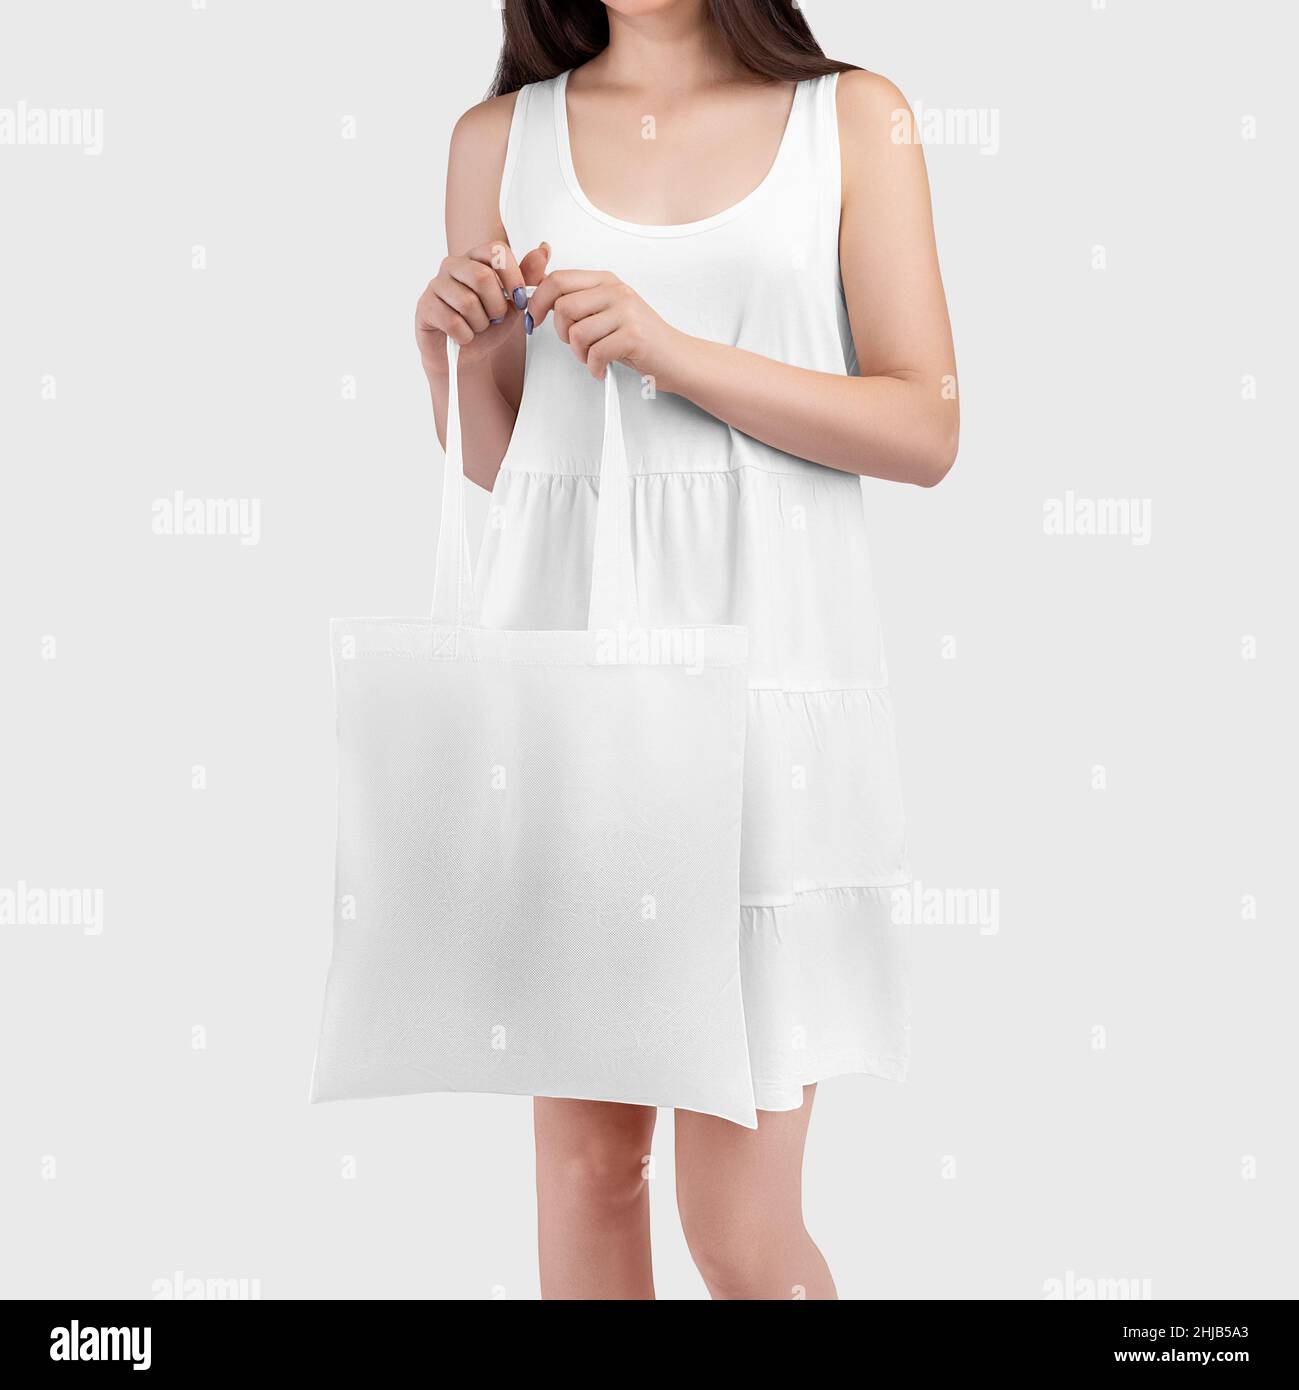 Template of a white reusable totebag in the hands of a girl in a sundress, handbag close-up, for design. Organic sack for shopping. Textured ecobag mo Stock Photo